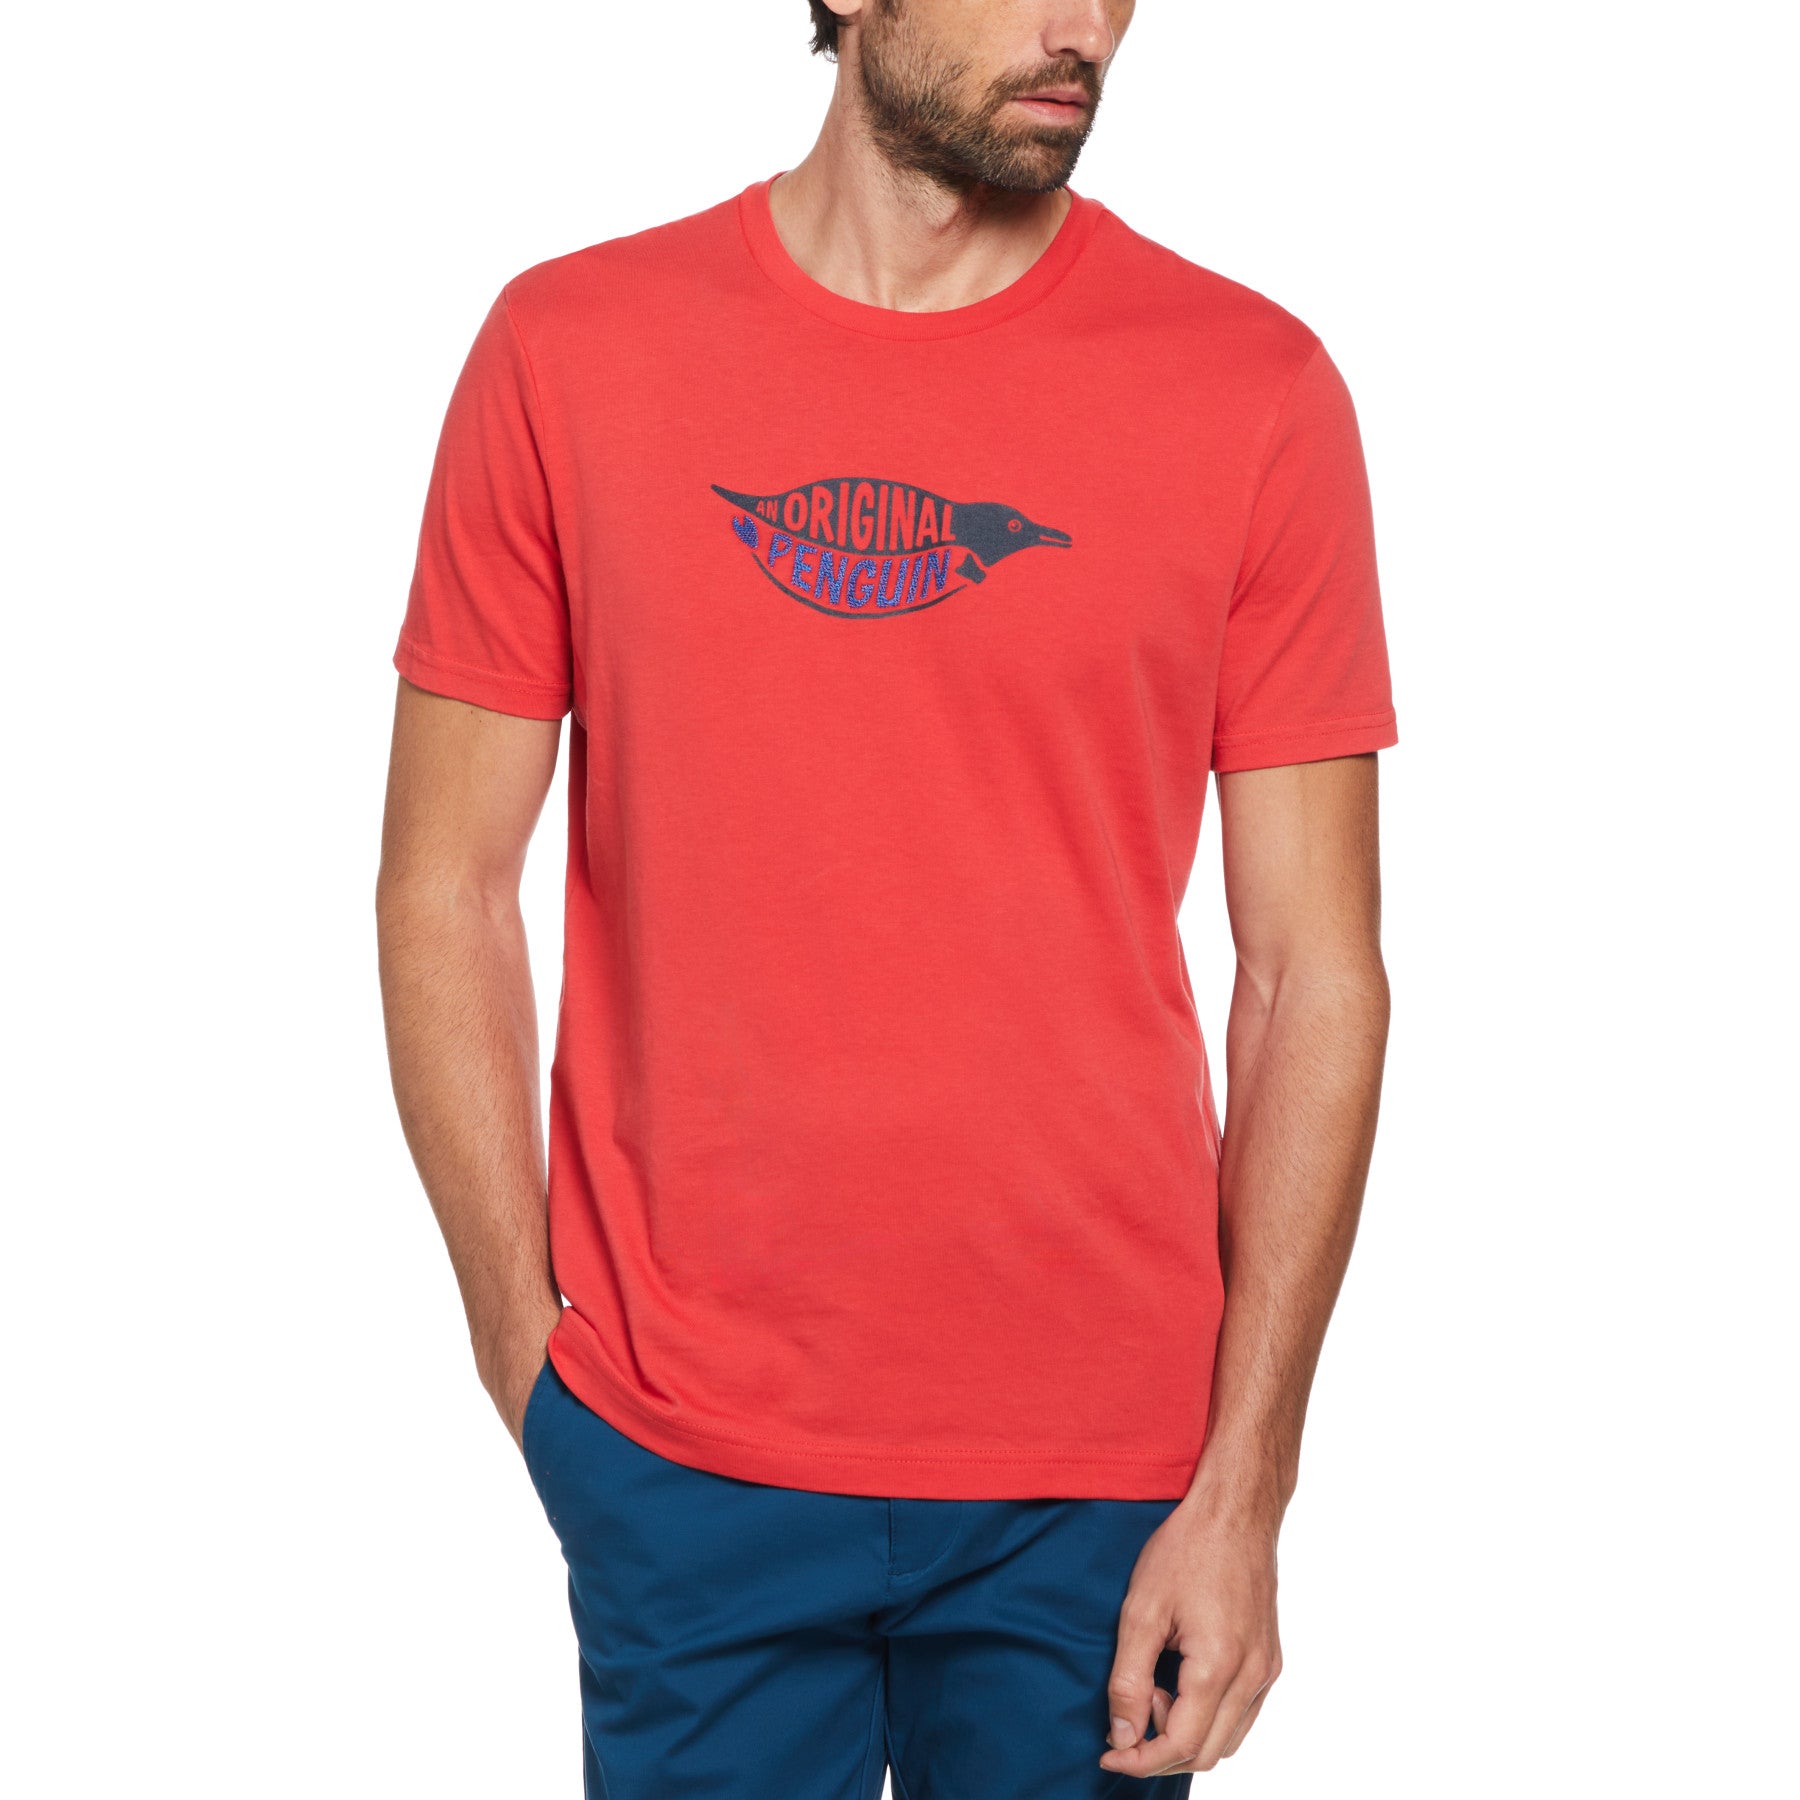 View Embroidered Penguin Graphic TShirt In Racing Red information